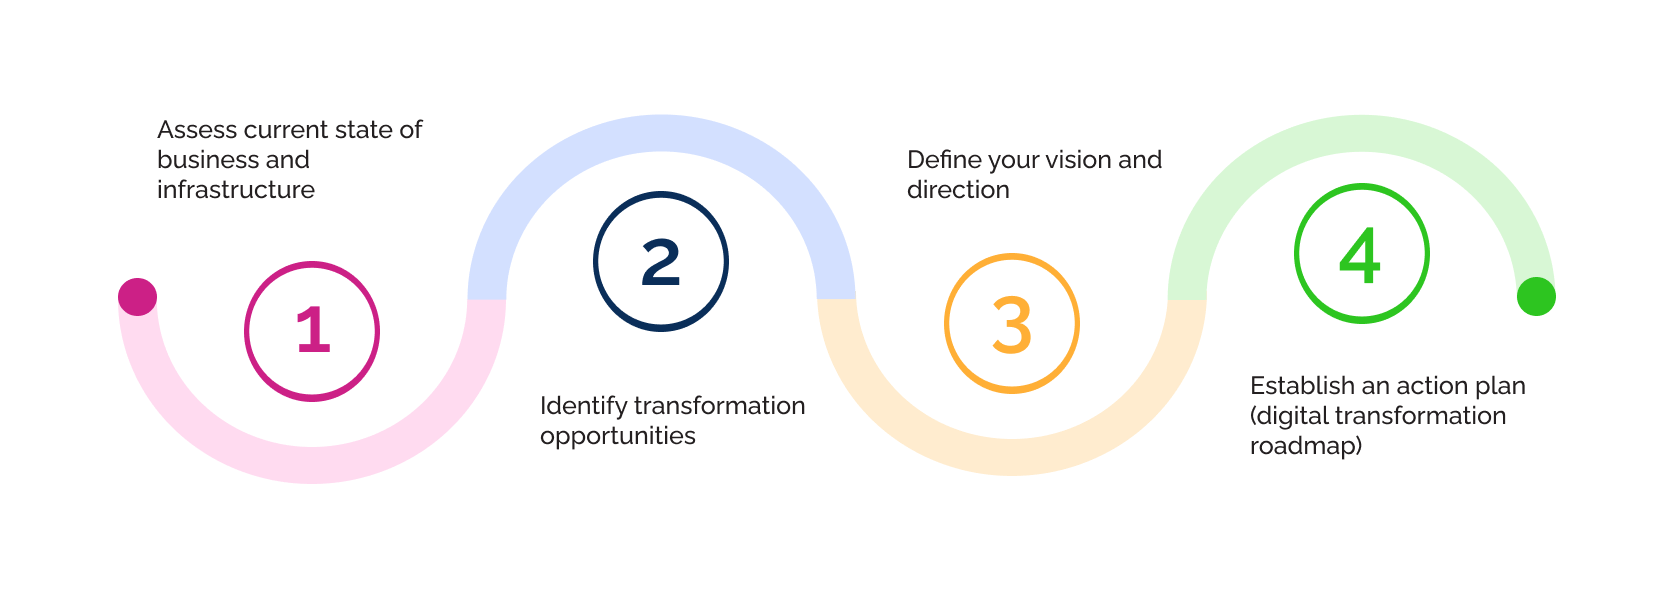 Infographic displaying 4 key steps for developing a digital transformation strategy.